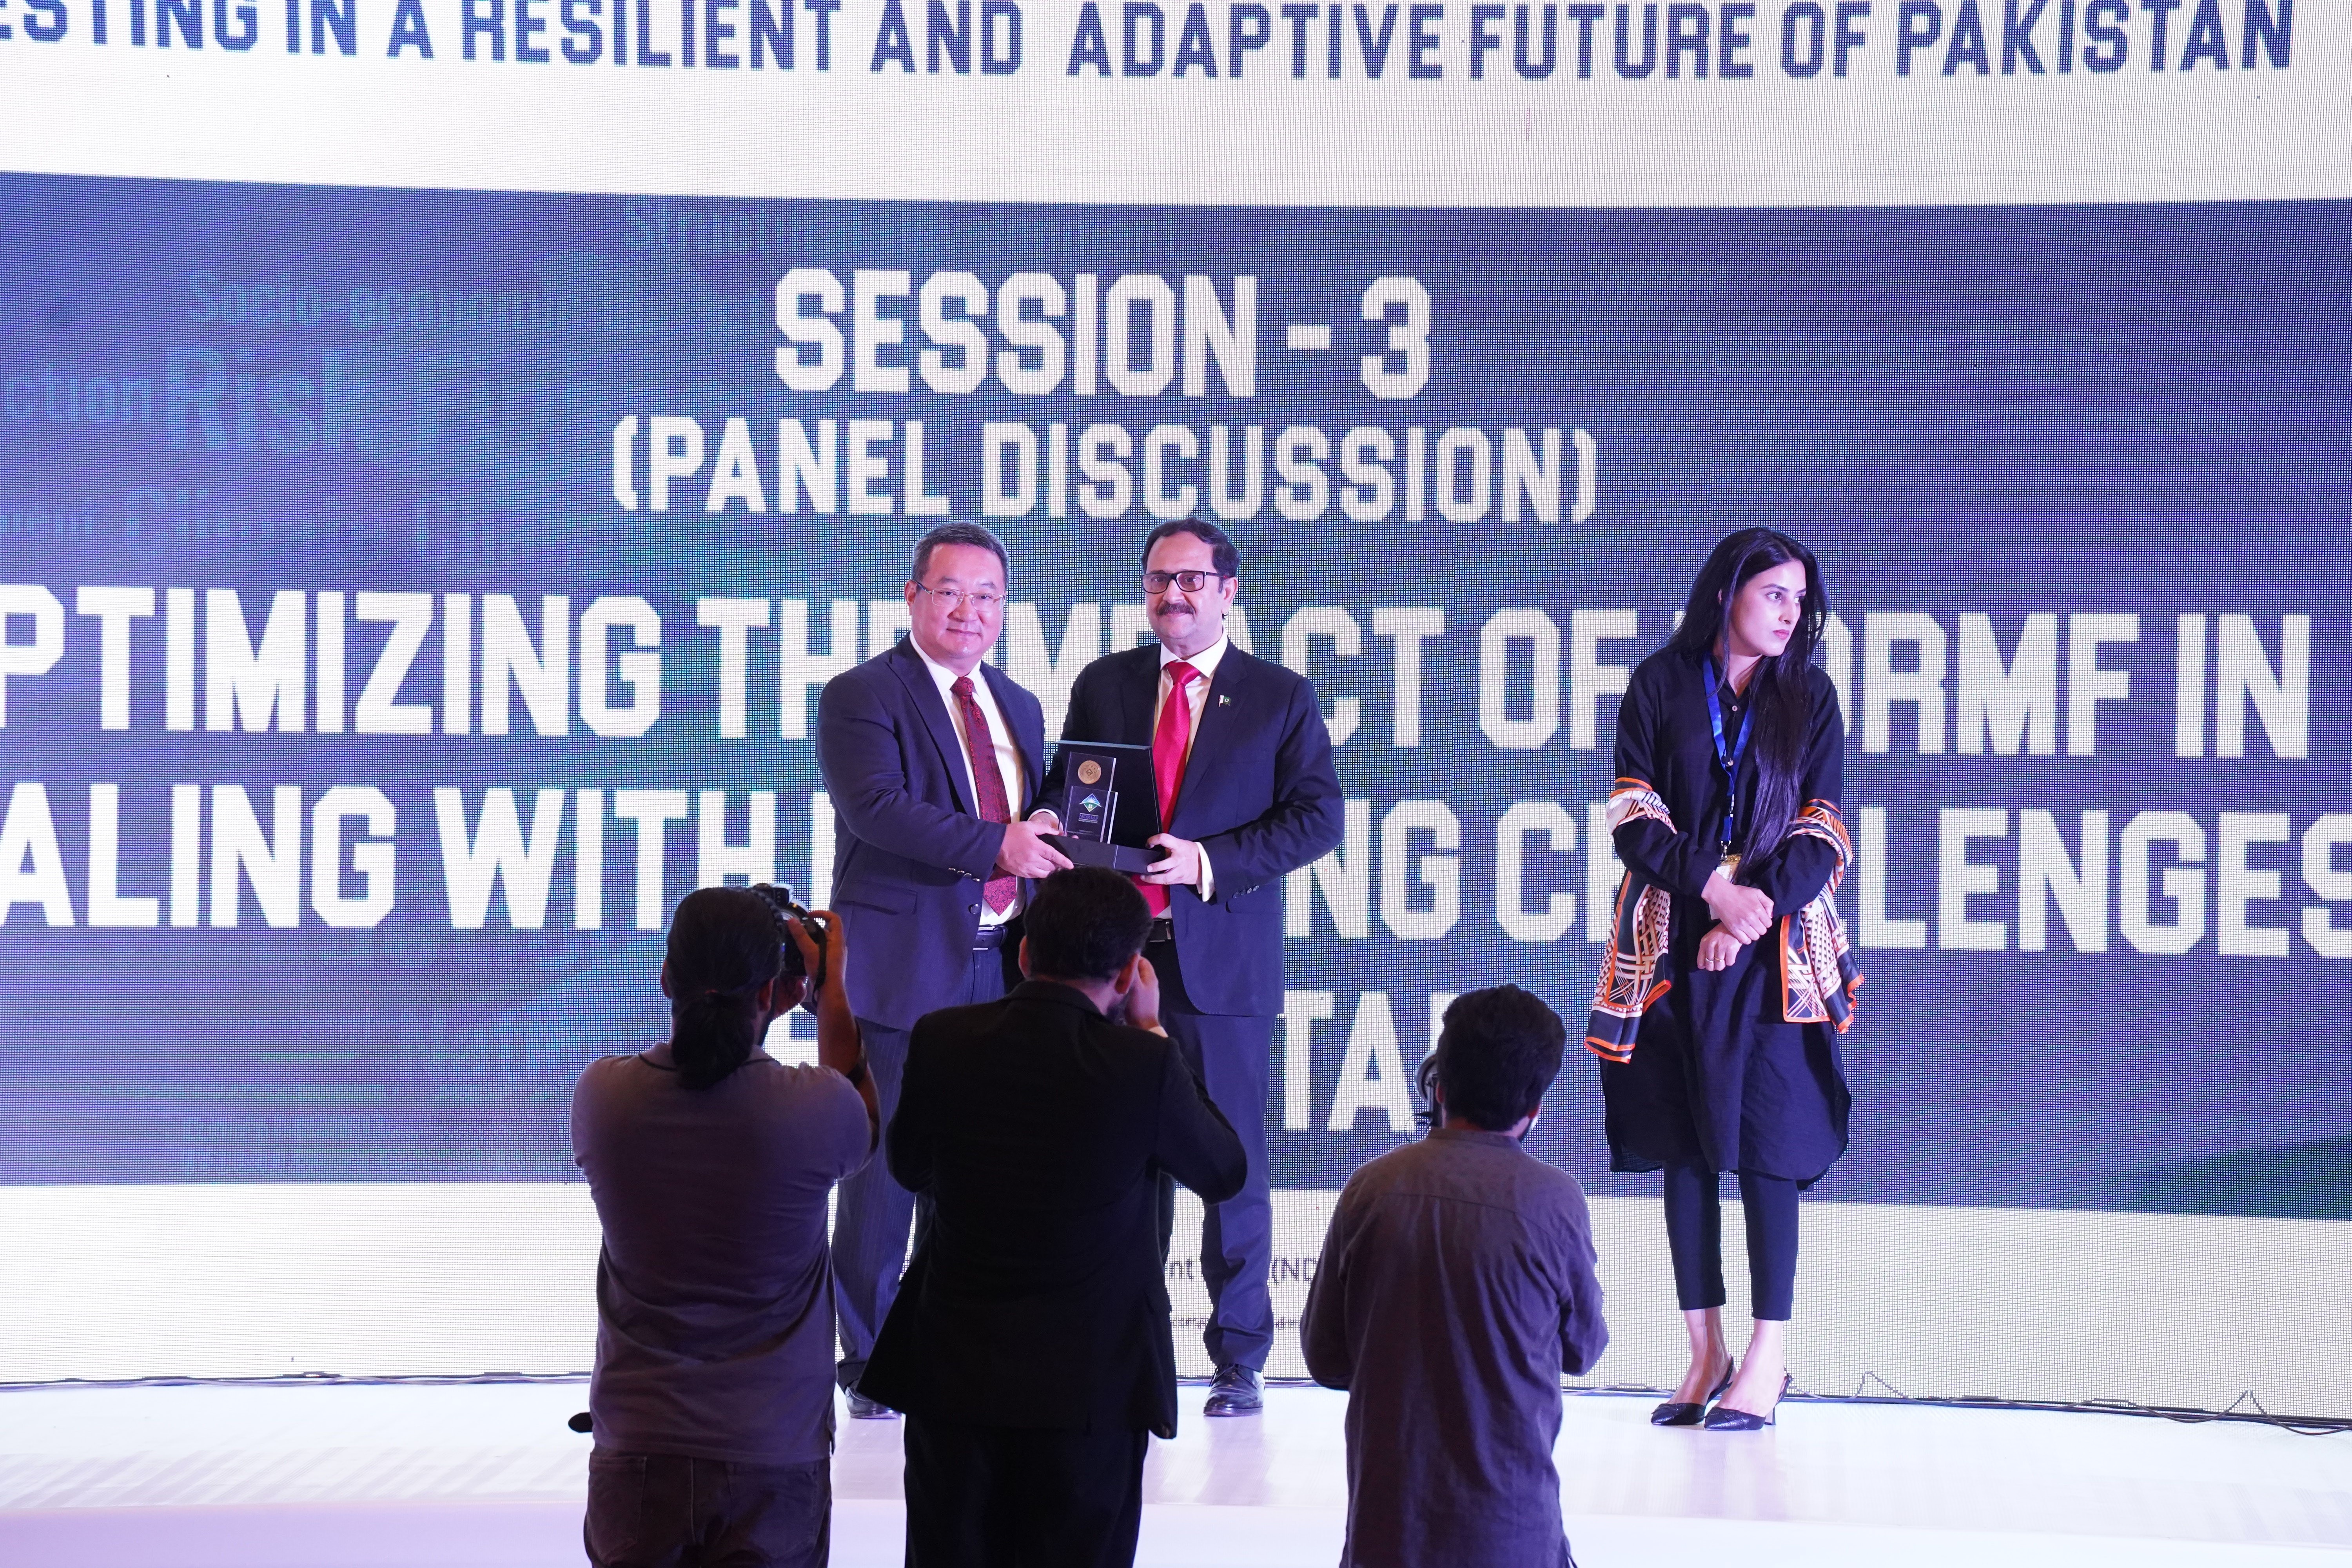 Bilal Anwar distributing awards to the guests at a  conference held on investing in a resilient and adaptive future of Pakistan